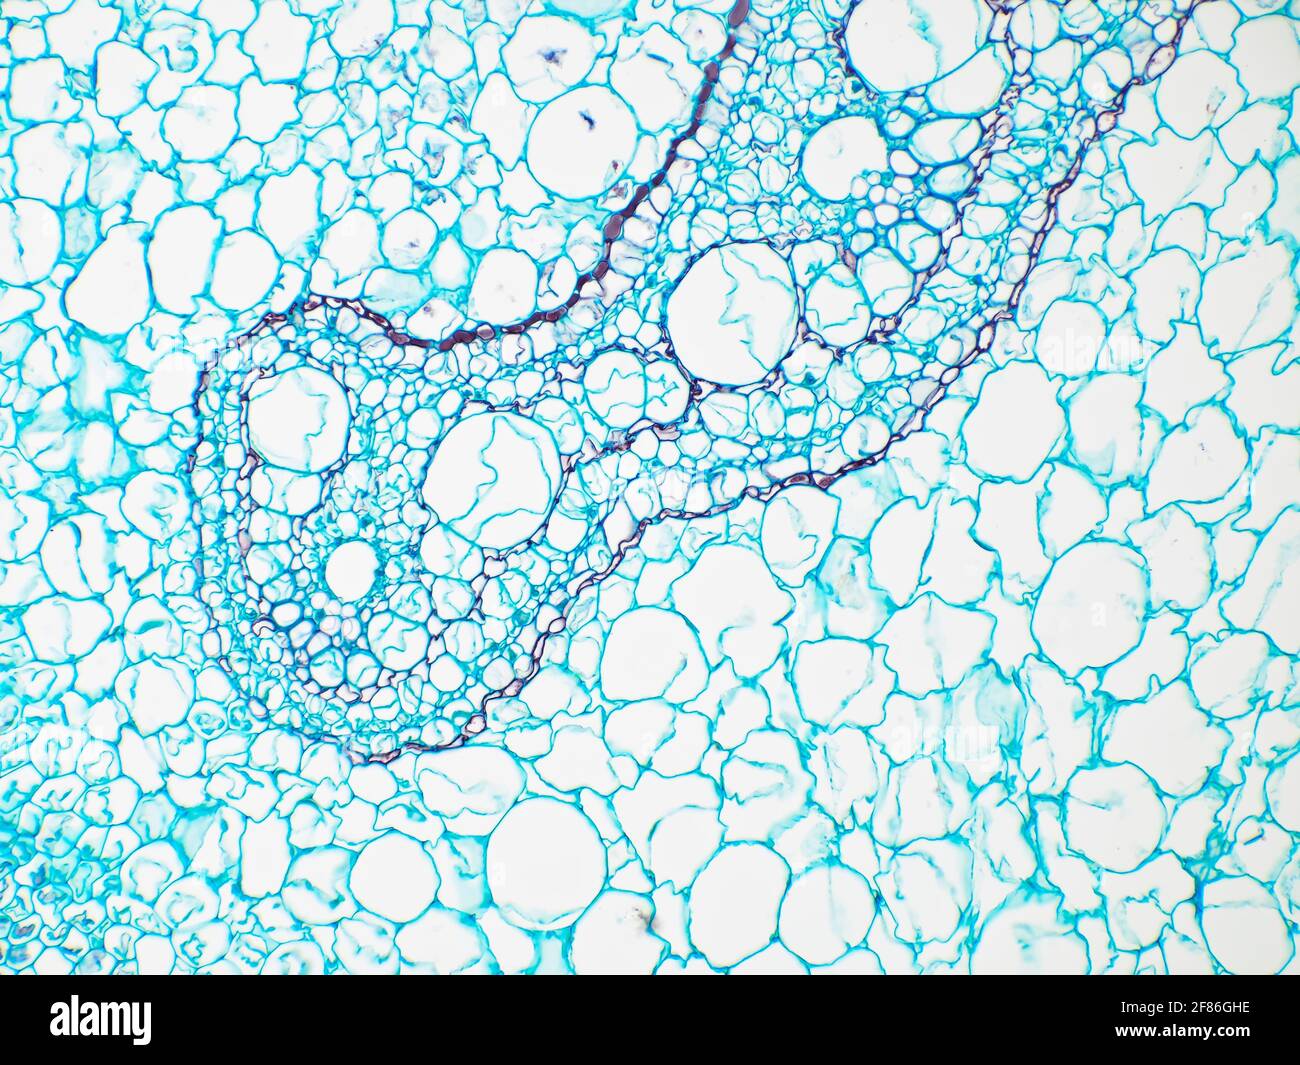 Fern stem cross-section under the microscope, horizontal field of view is about 0.85mm Stock Photo